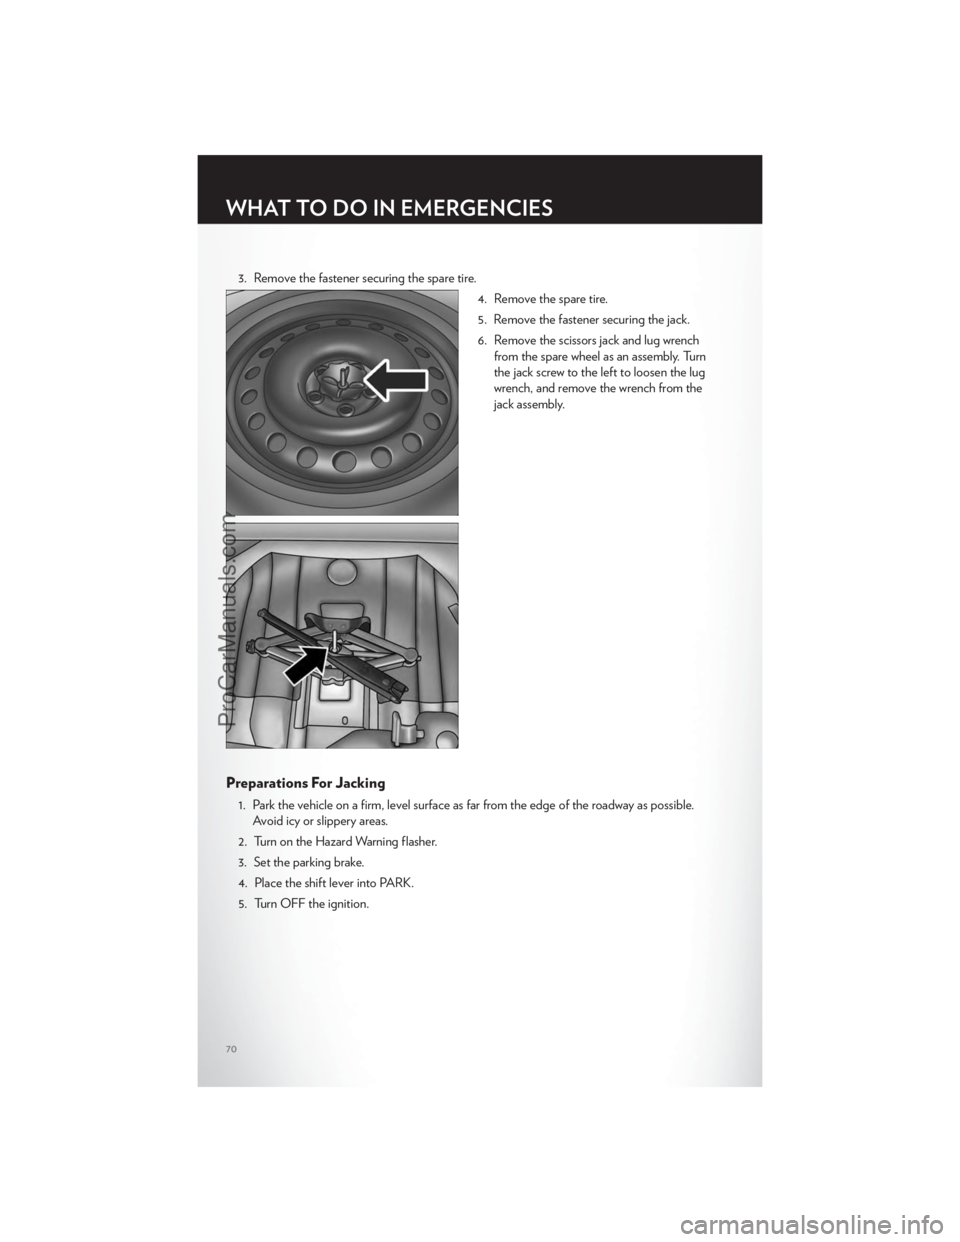 CHRYSLER 300 S 2012  Owners Manual 3. Remove the fastener securing the spare tire.4. Remove the spare tire.
5. Remove the fastener securing the jack.
6. Remove the scissors jack and lug wrenchfrom the spare wheel as an assembly. Turn
t